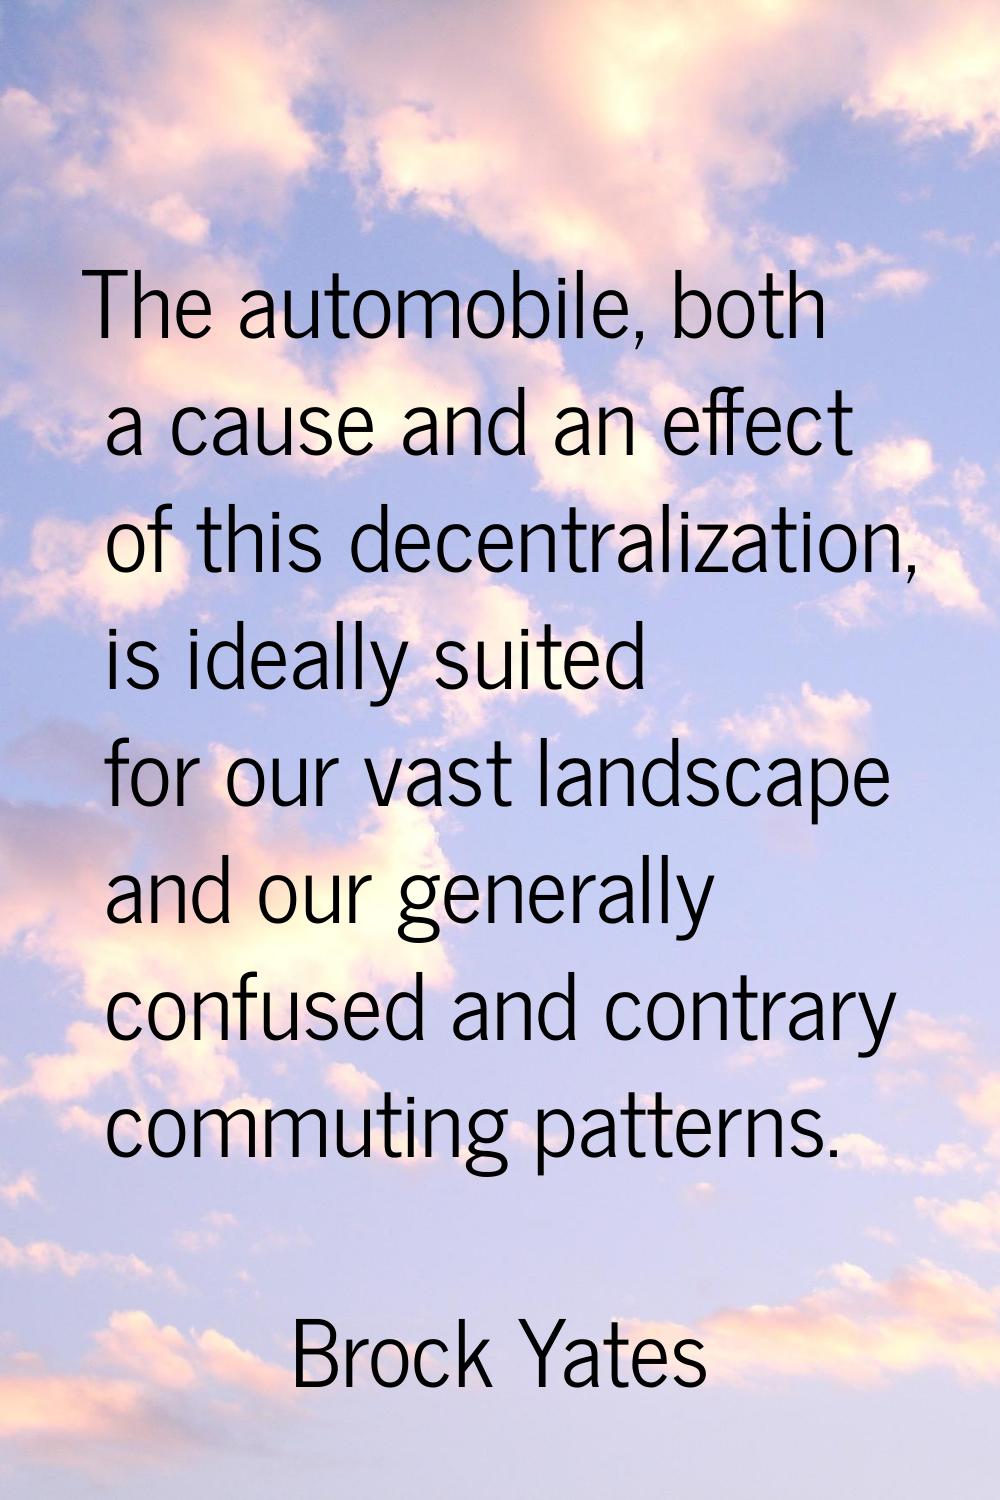 The automobile, both a cause and an effect of this decentralization, is ideally suited for our vast